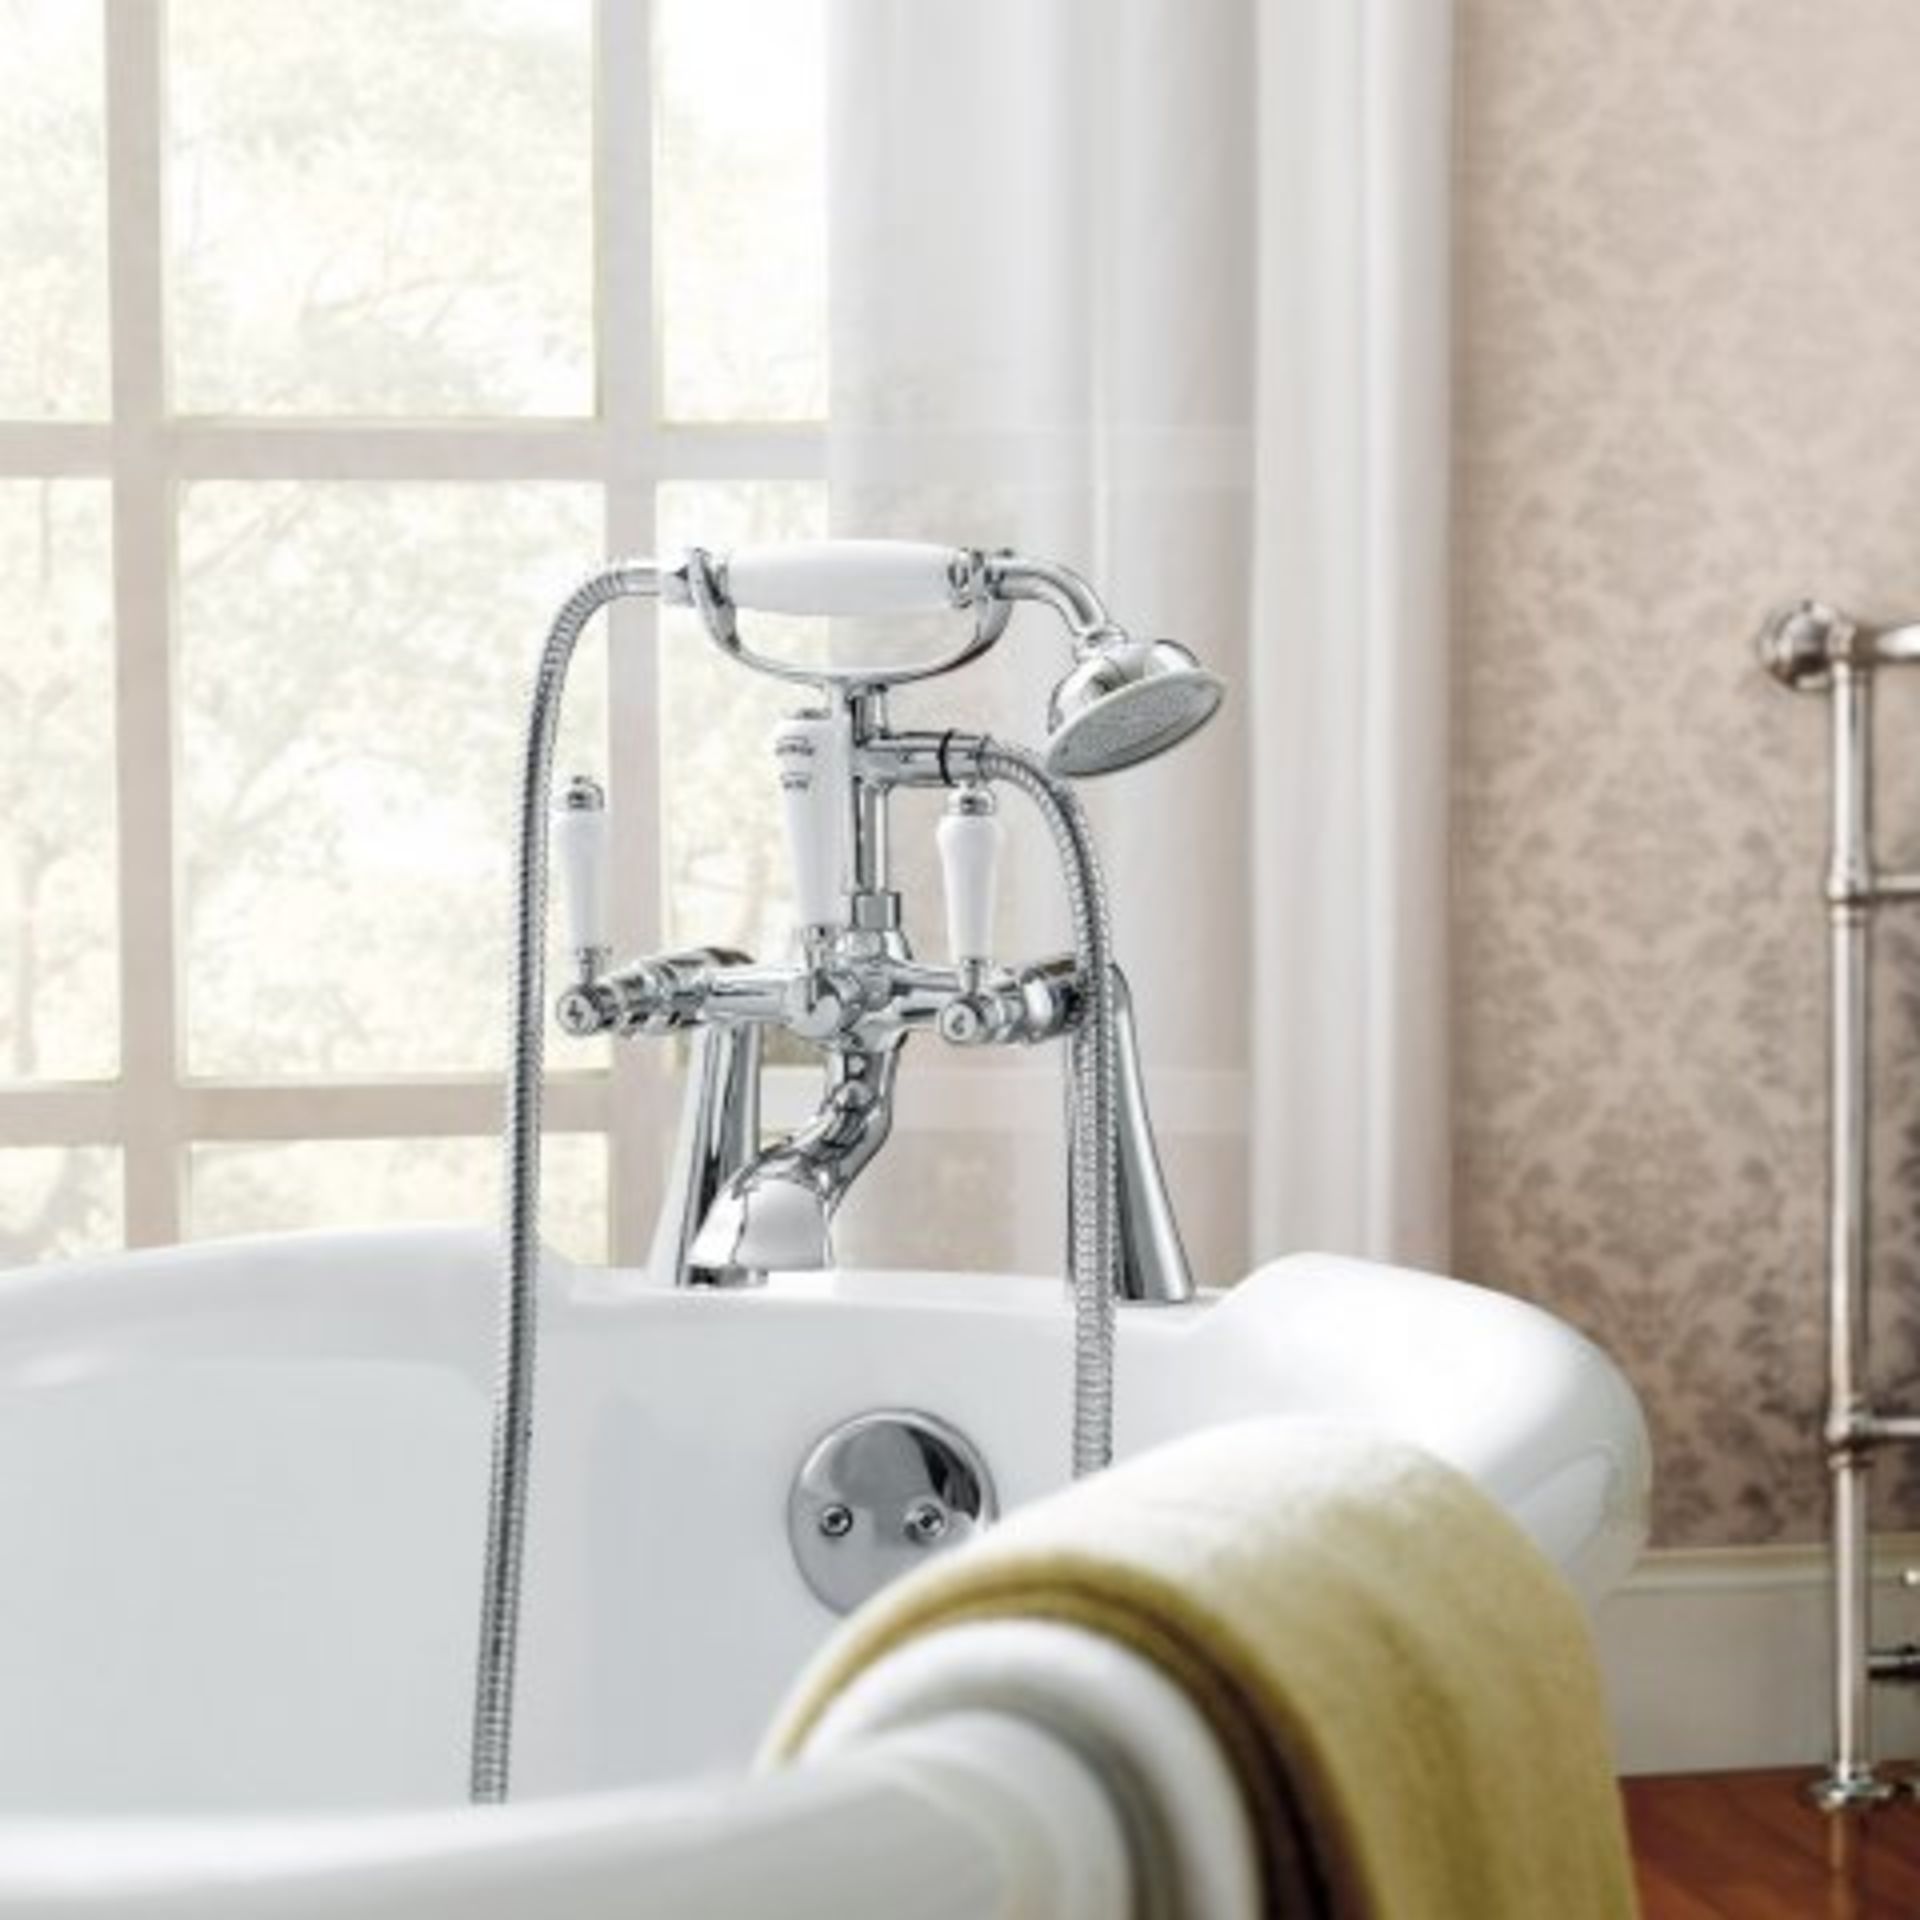 (I61) Regal Chrome Traditional Bath Mixer Lever Tap with Hand Held Shower RRP £199.99 Vintage - Bild 2 aus 3